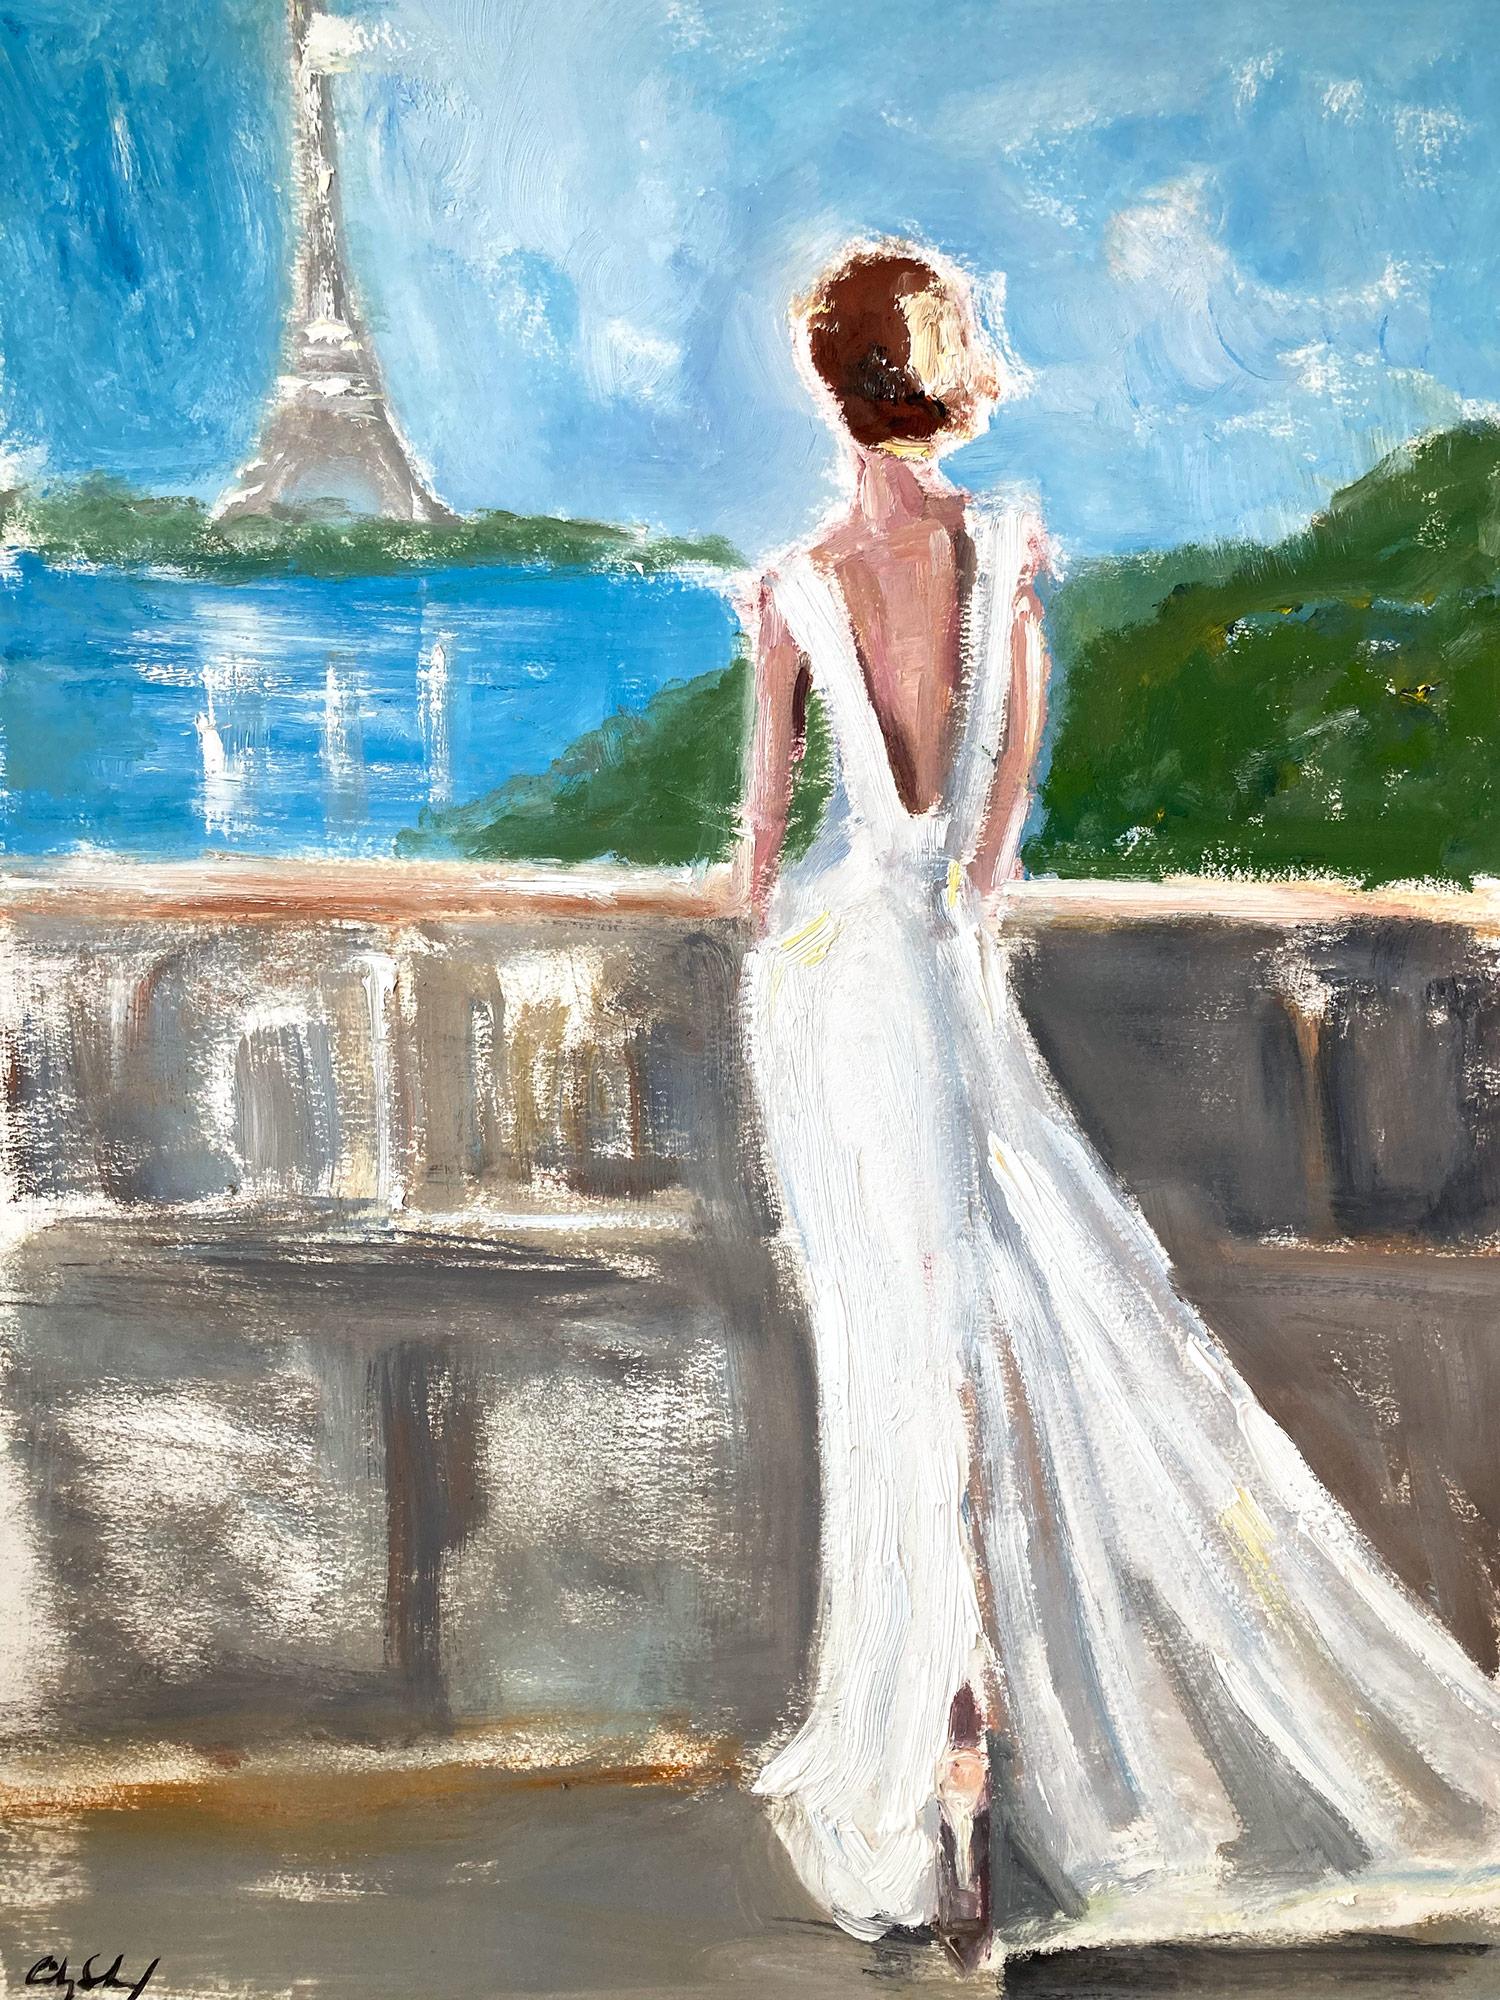 Cindy Shaoul Figurative Painting - "Dreaming of Paris " Figure by the Eiffel Tower in Chanel Oil Painting on Paper